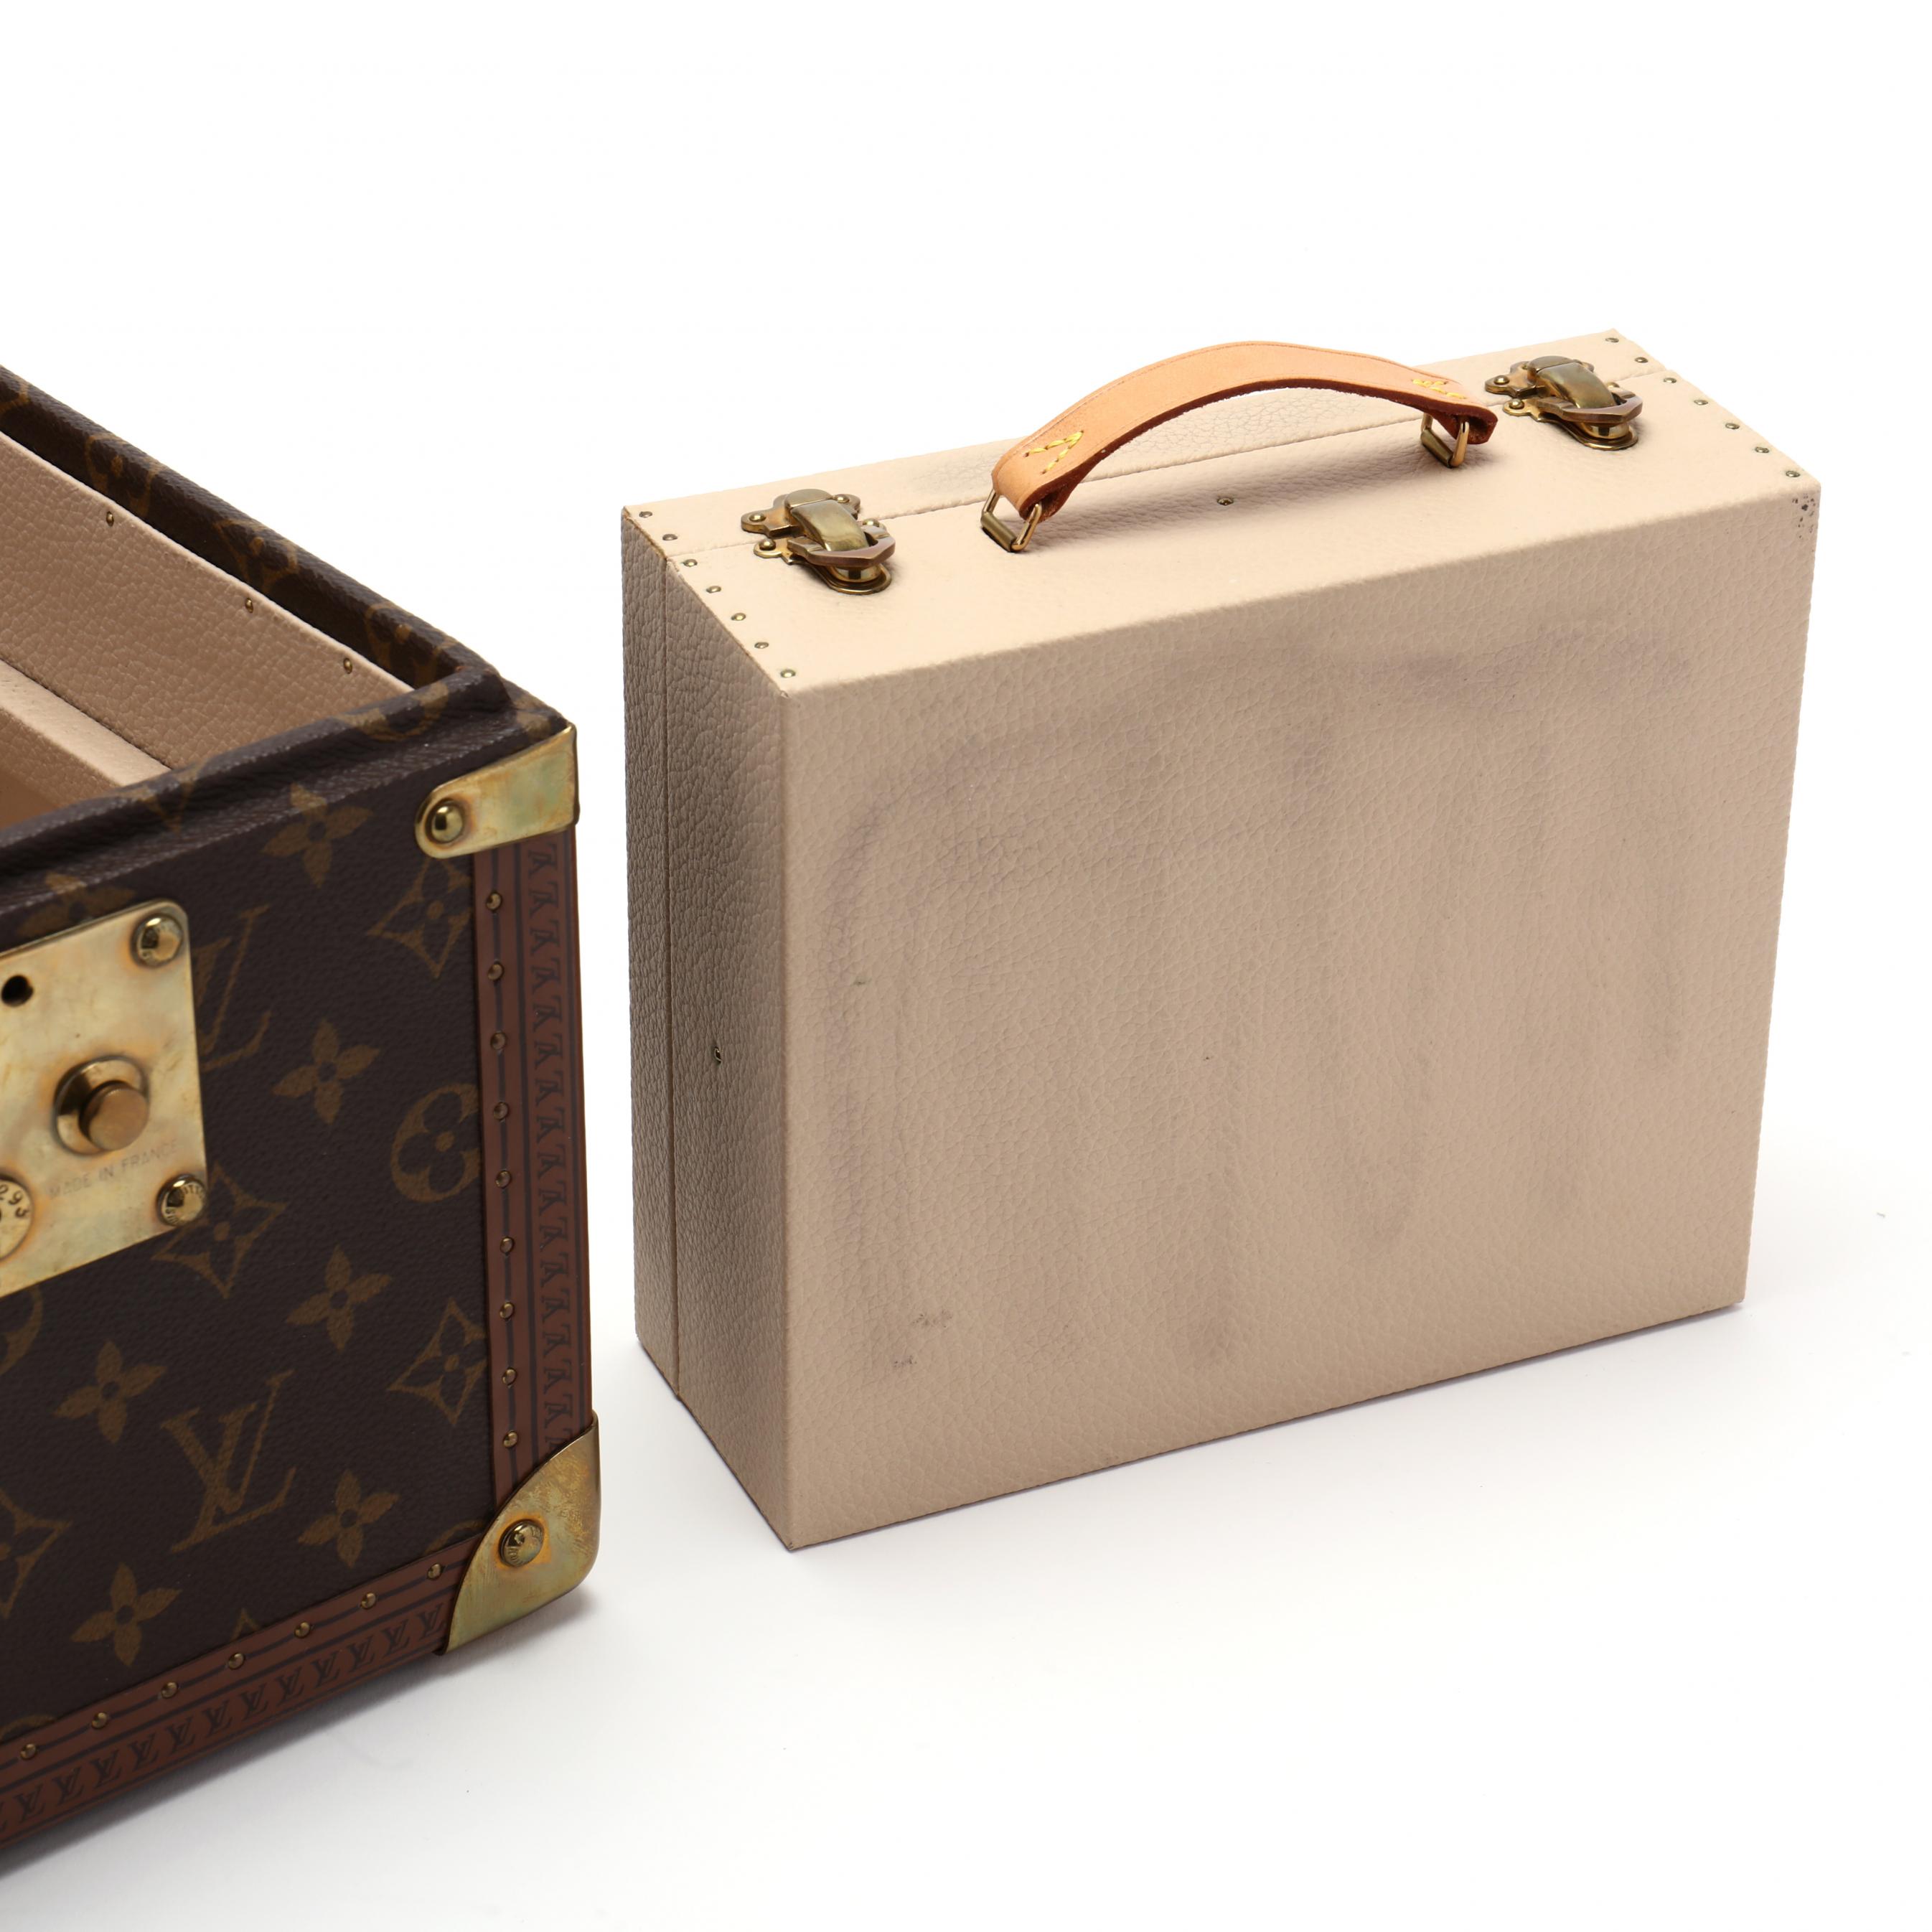 Sold at Auction: Louis Vuitton Monogram Canvas Cosmetic Trunk